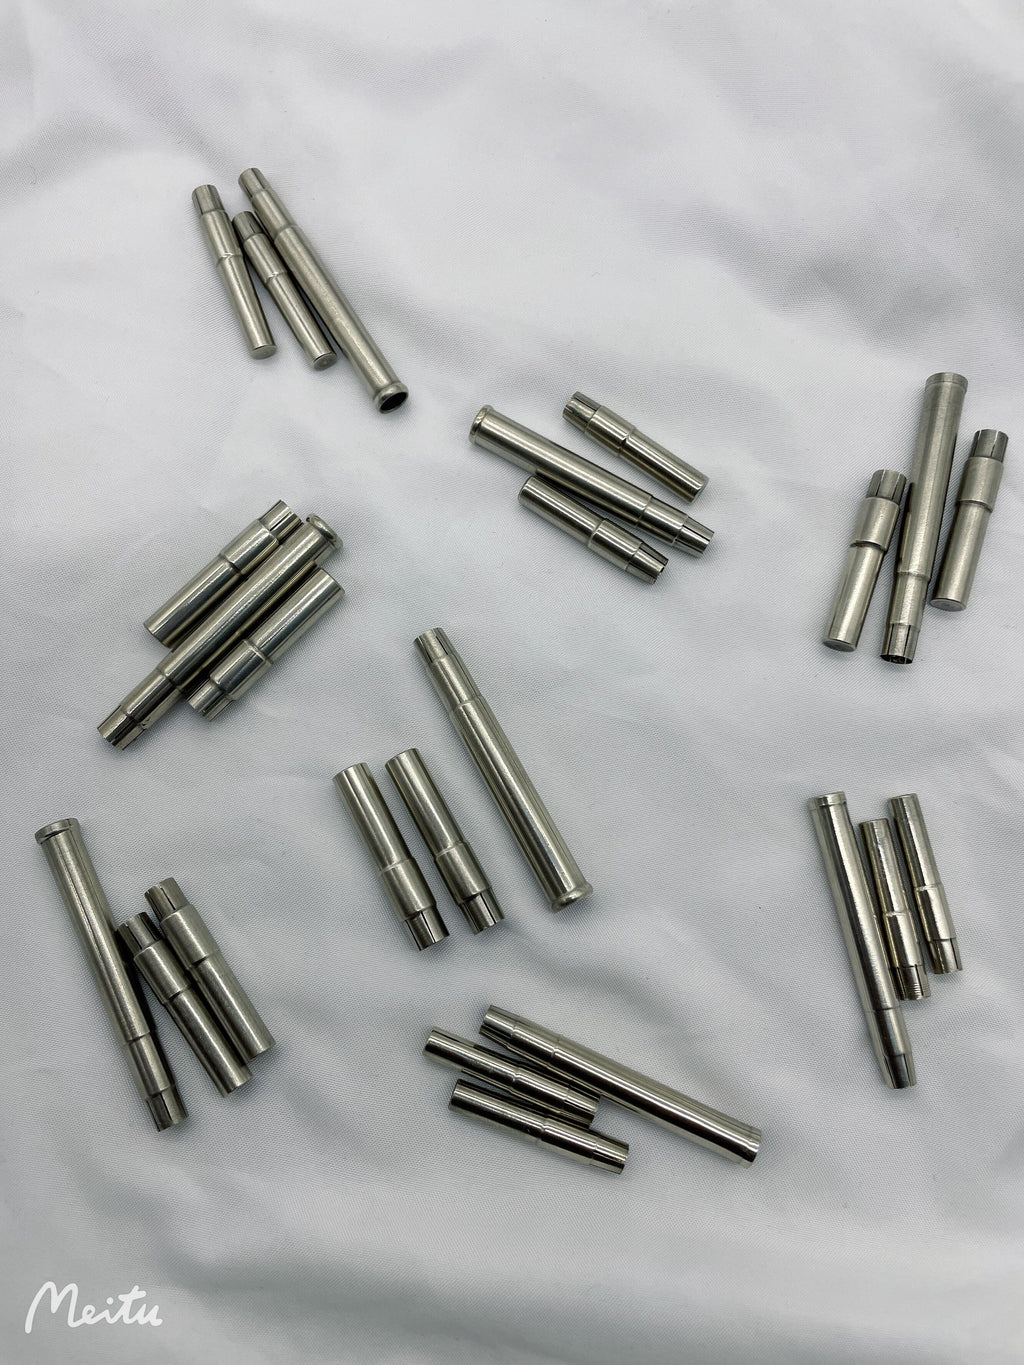 18% NICKEL SILVER FERRULES FOR YOUR BAMBOO FLY ROD.